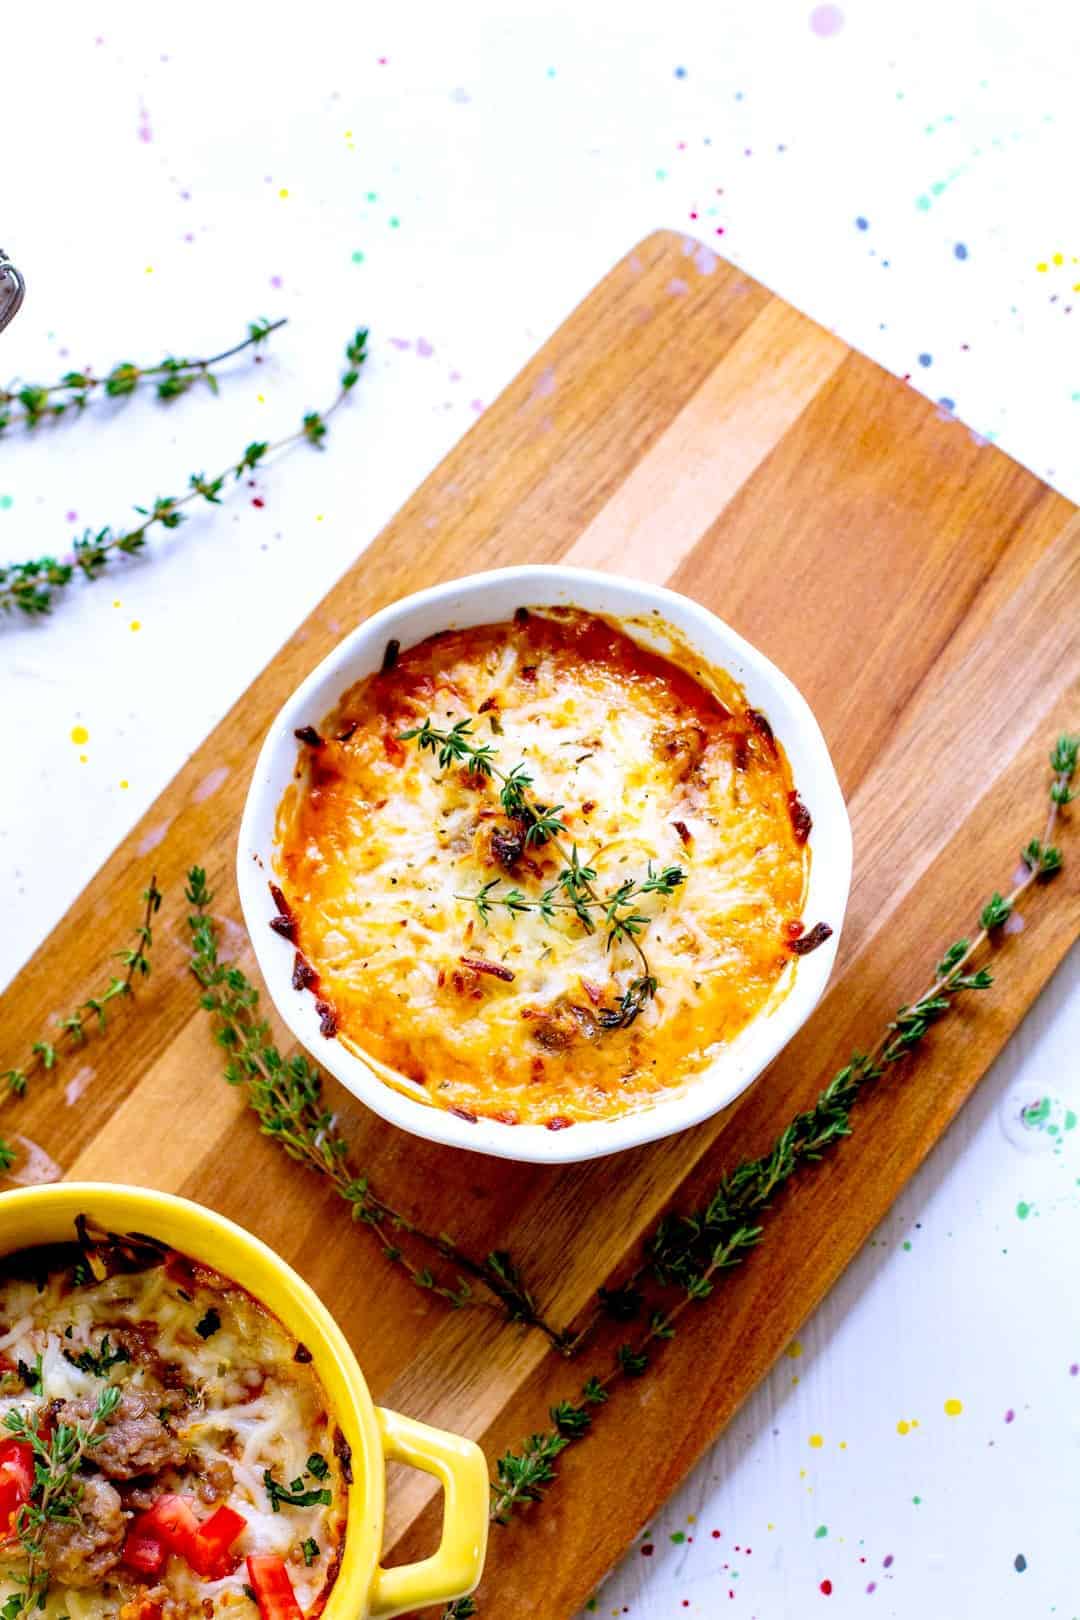 A bowl of food on a table, with Cheese and Macaroni